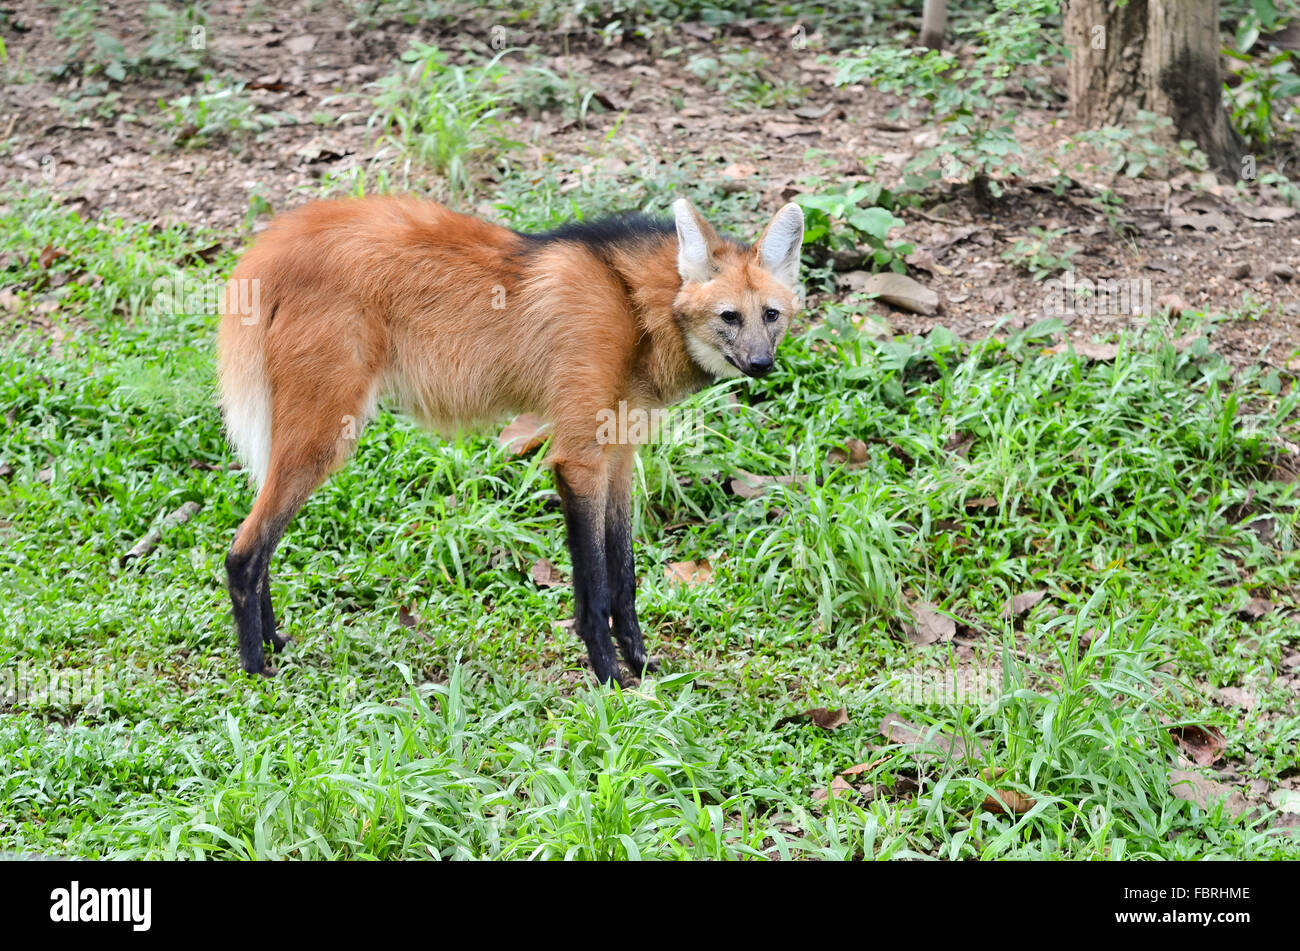 maned wolf stand on grass Stock Photo